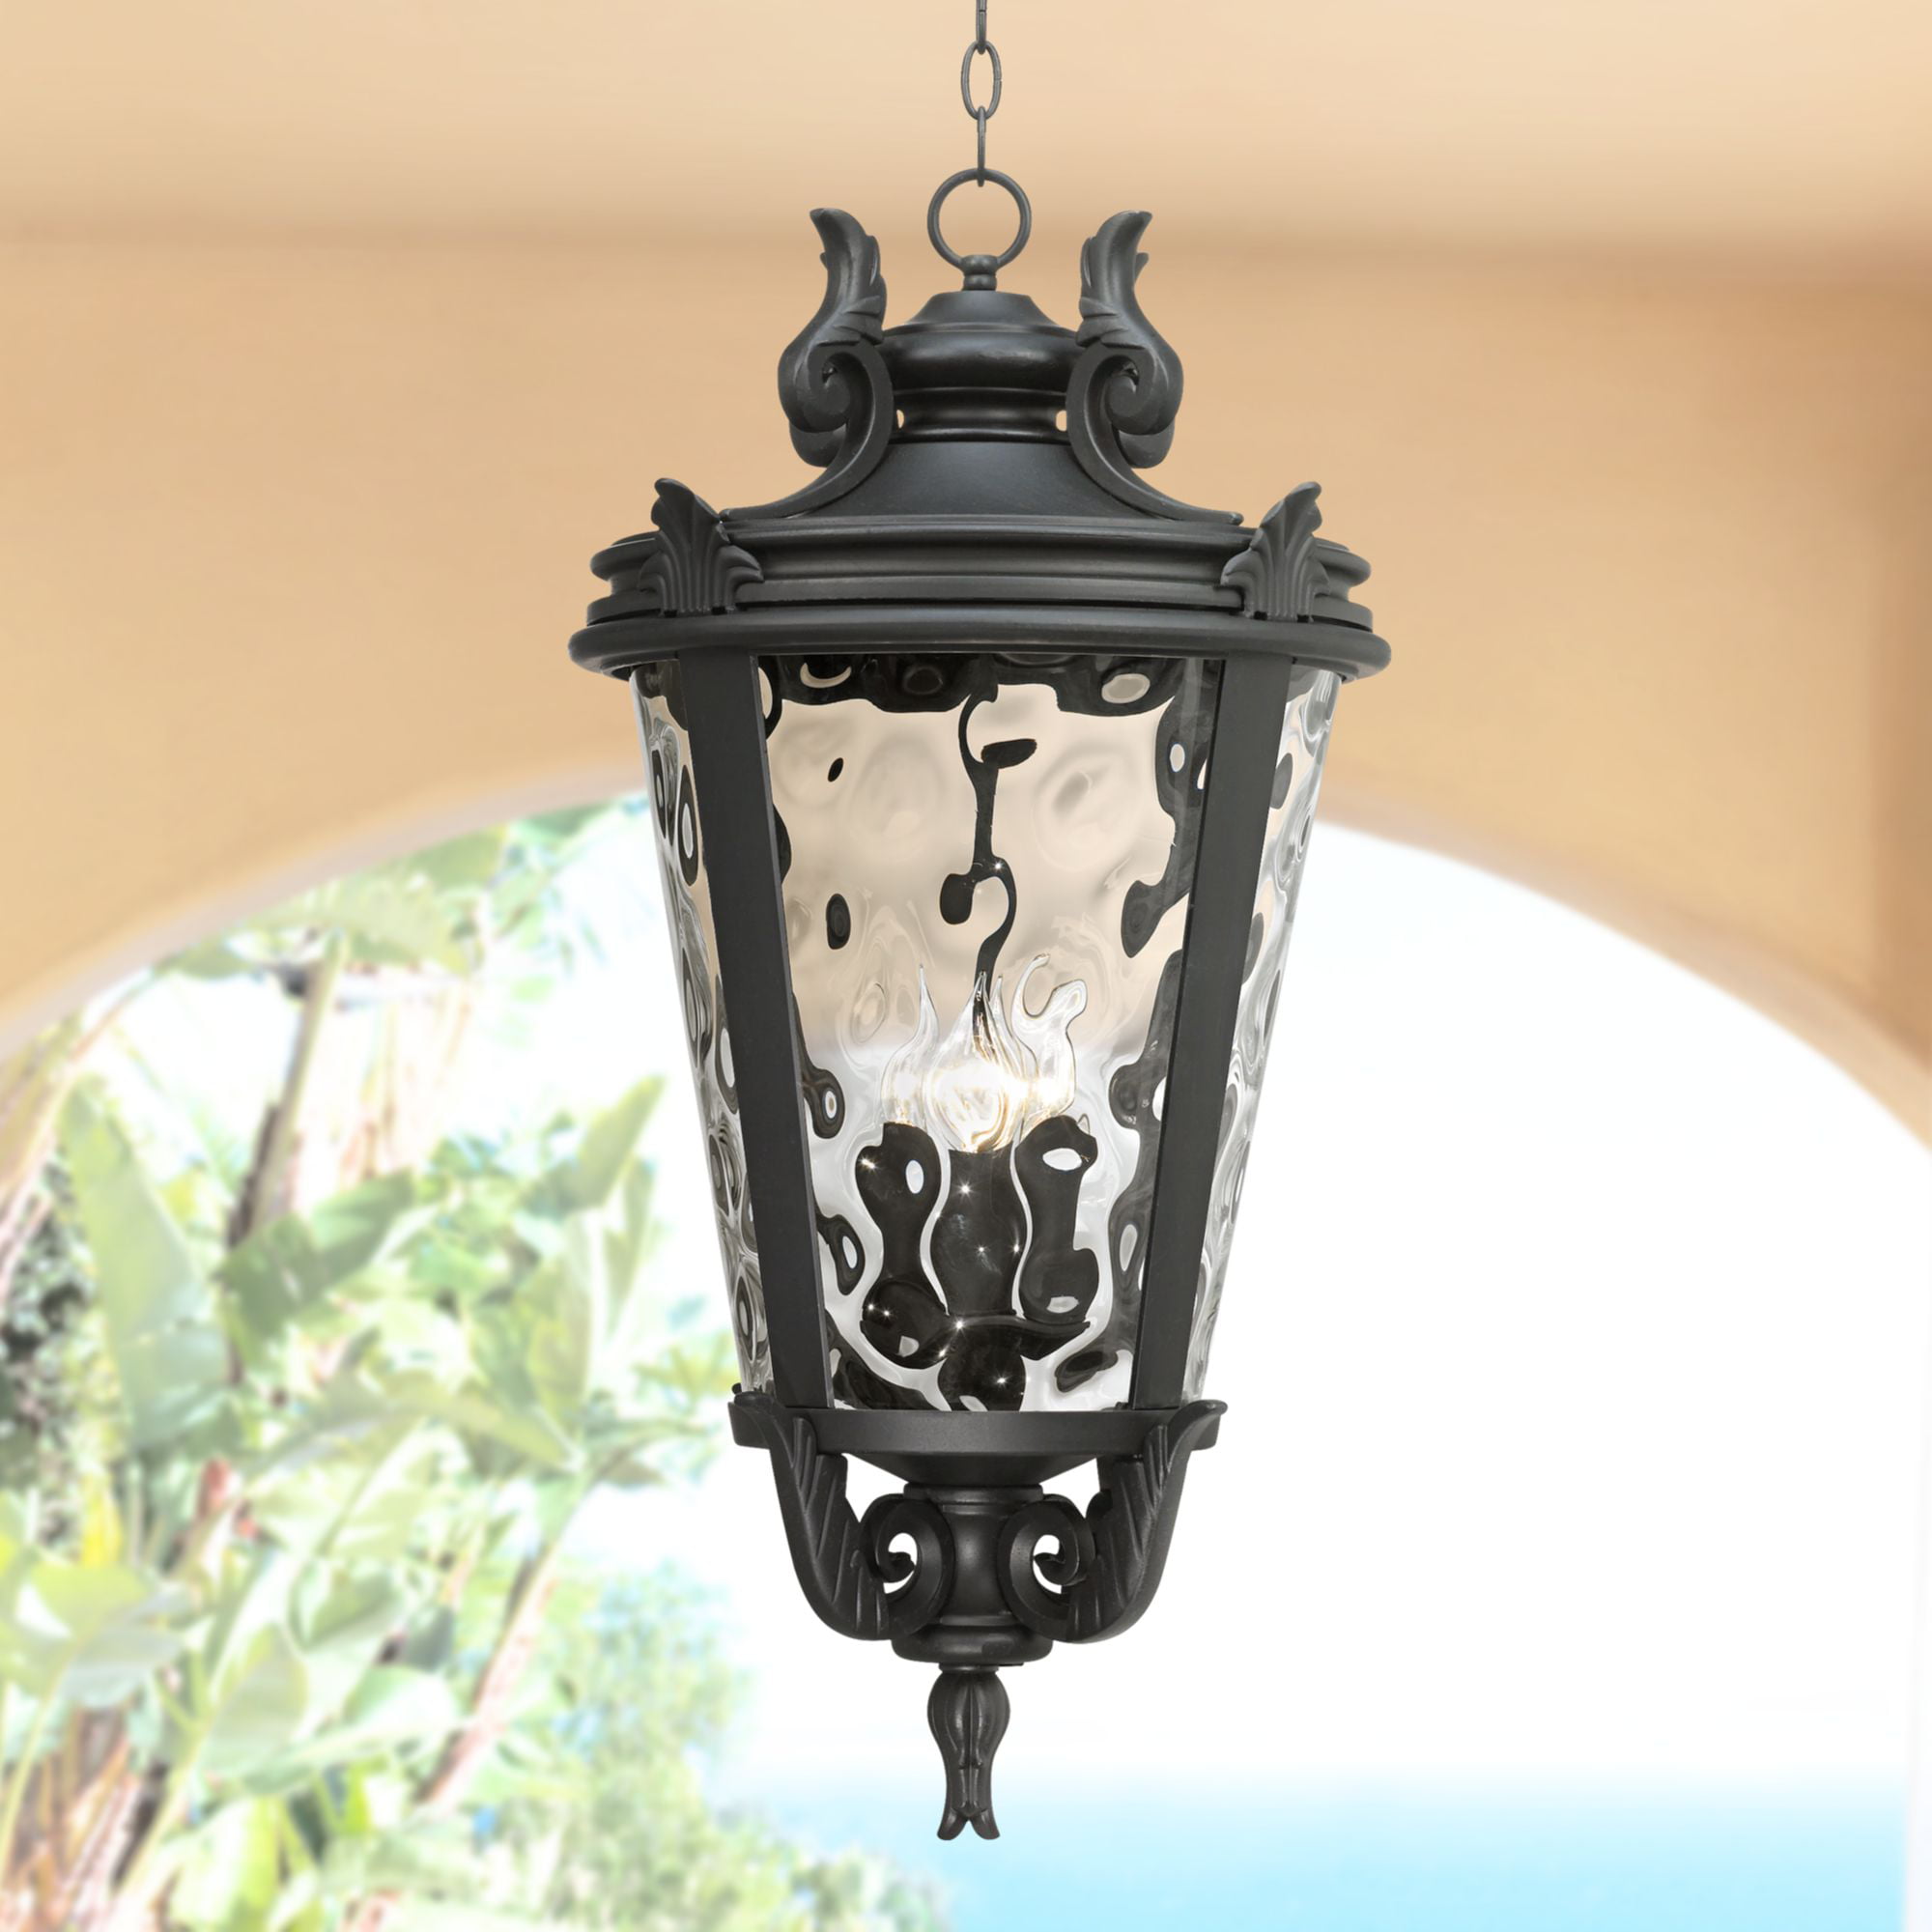 Clear Hammered Glass Damp Rated, Lamp Plus Outdoor Lighting